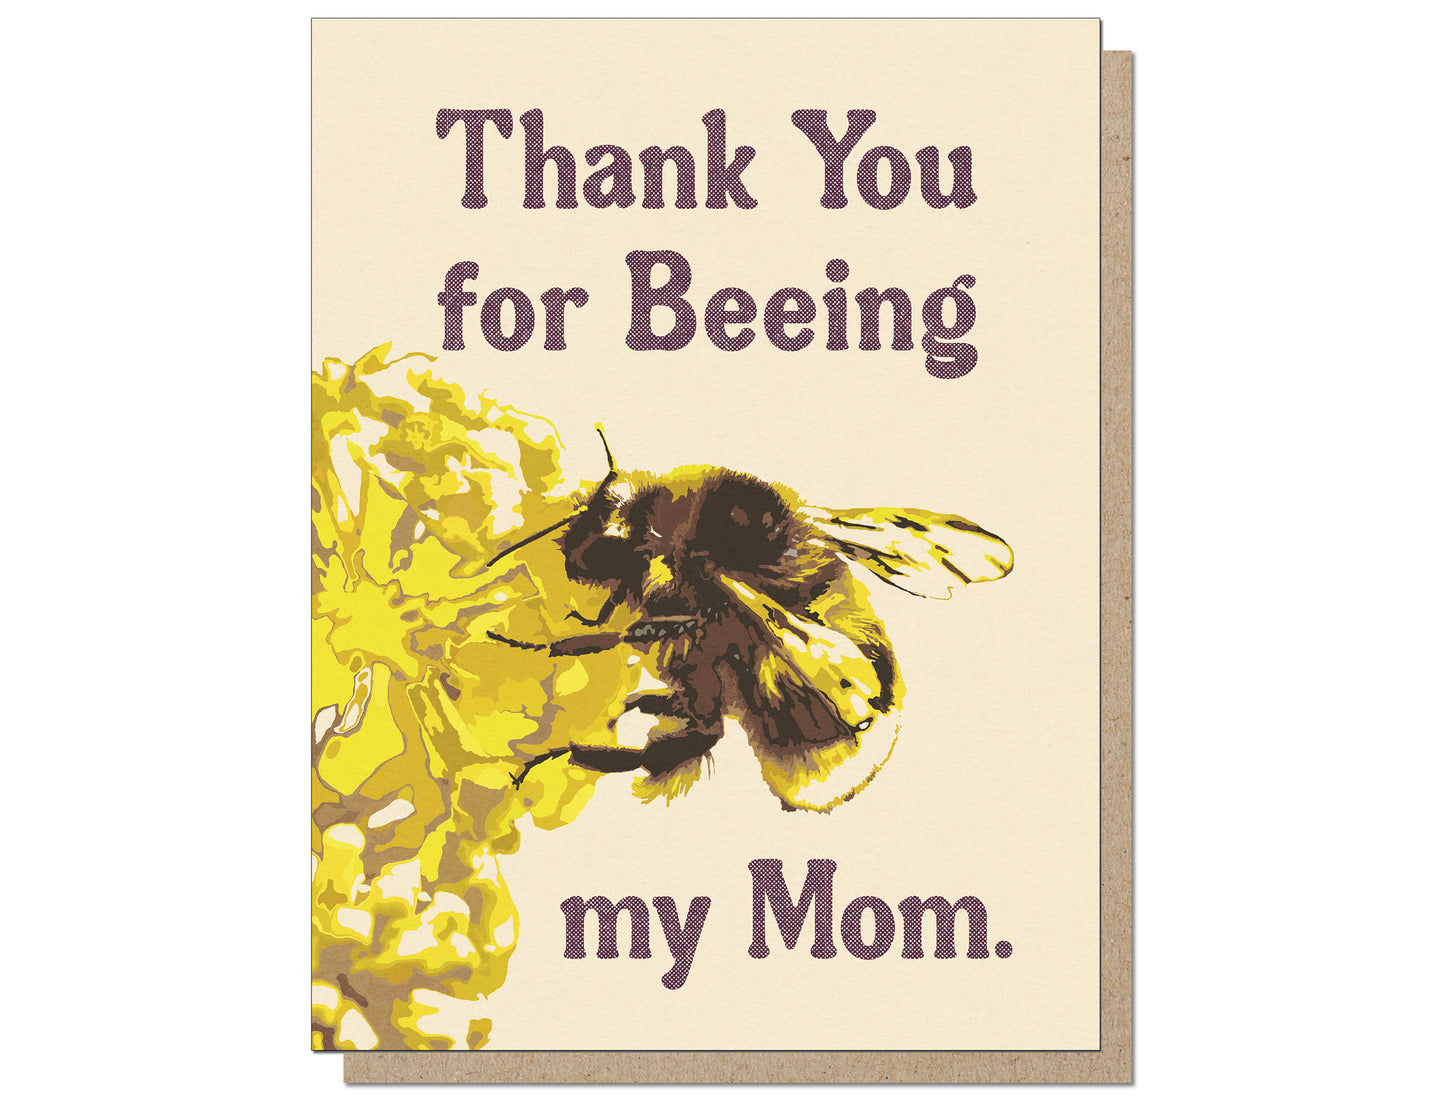 Thank You For Beeing My Mom Mother's Day Card